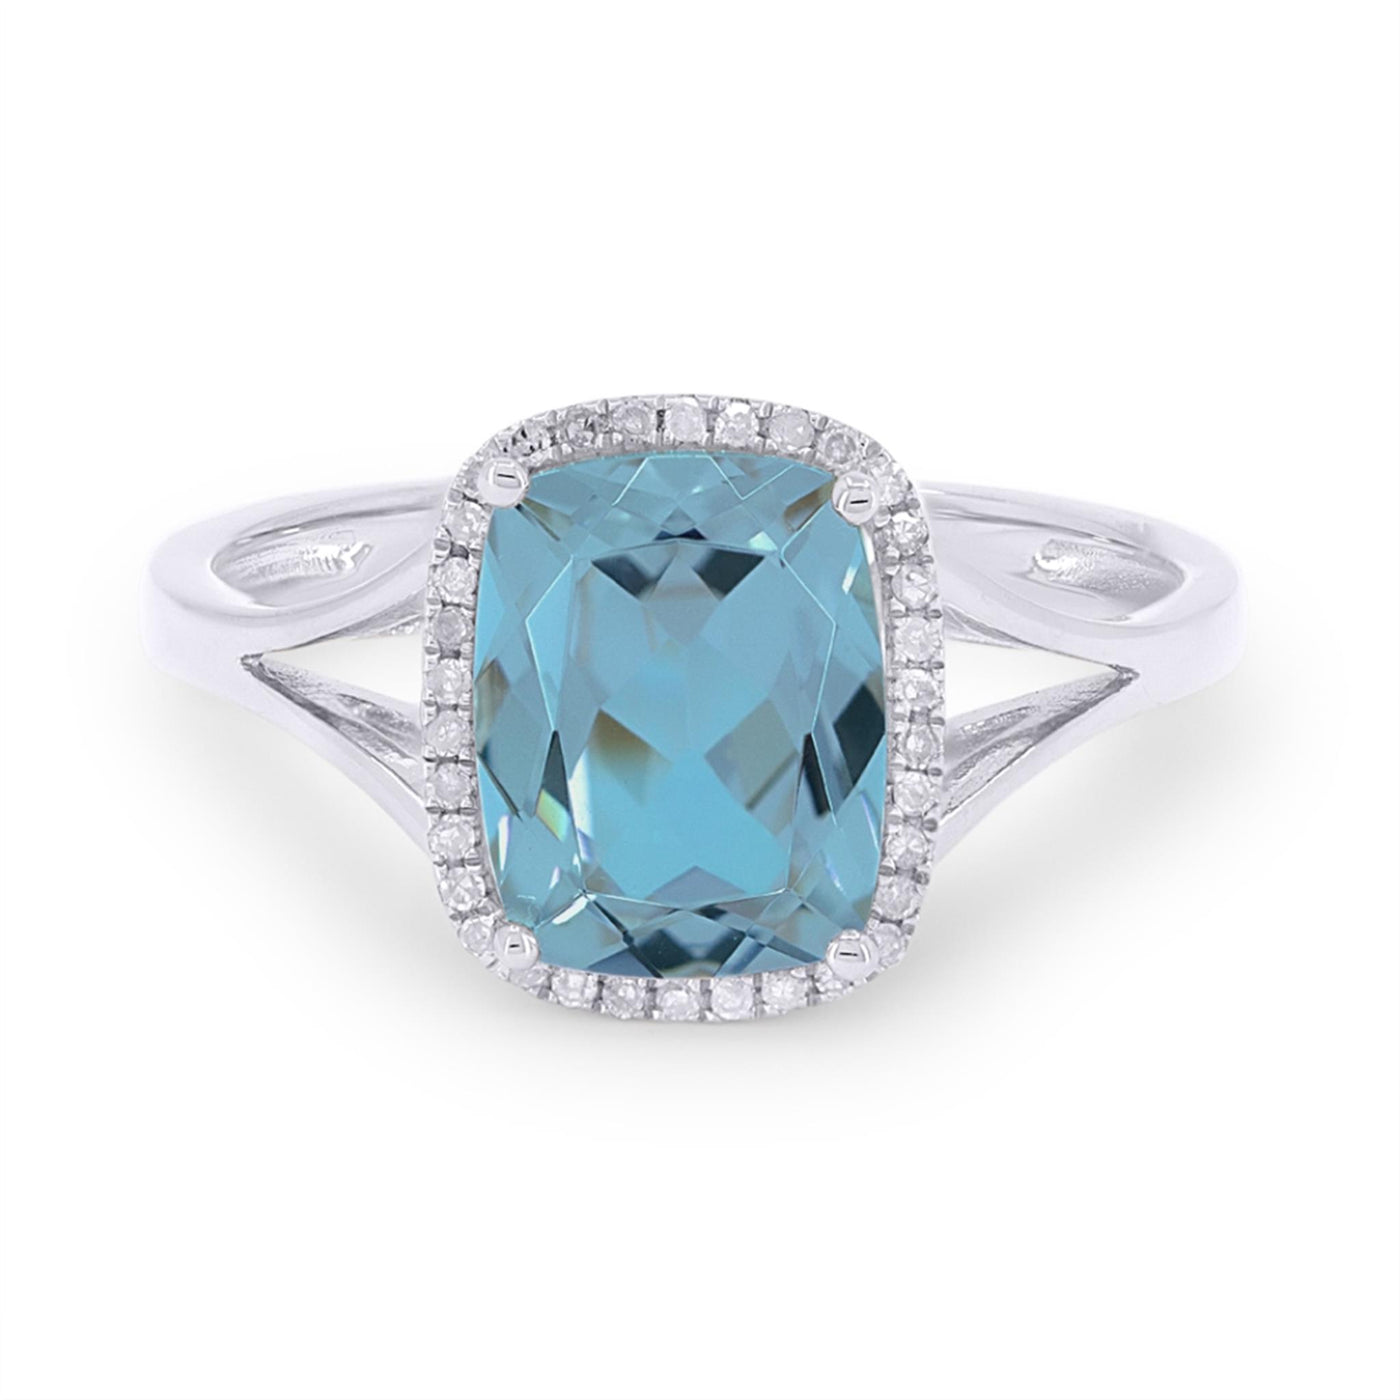 Madison L 14K White Gold 2.83ctw Halo Style Blue Topaz and Diamonds Ring